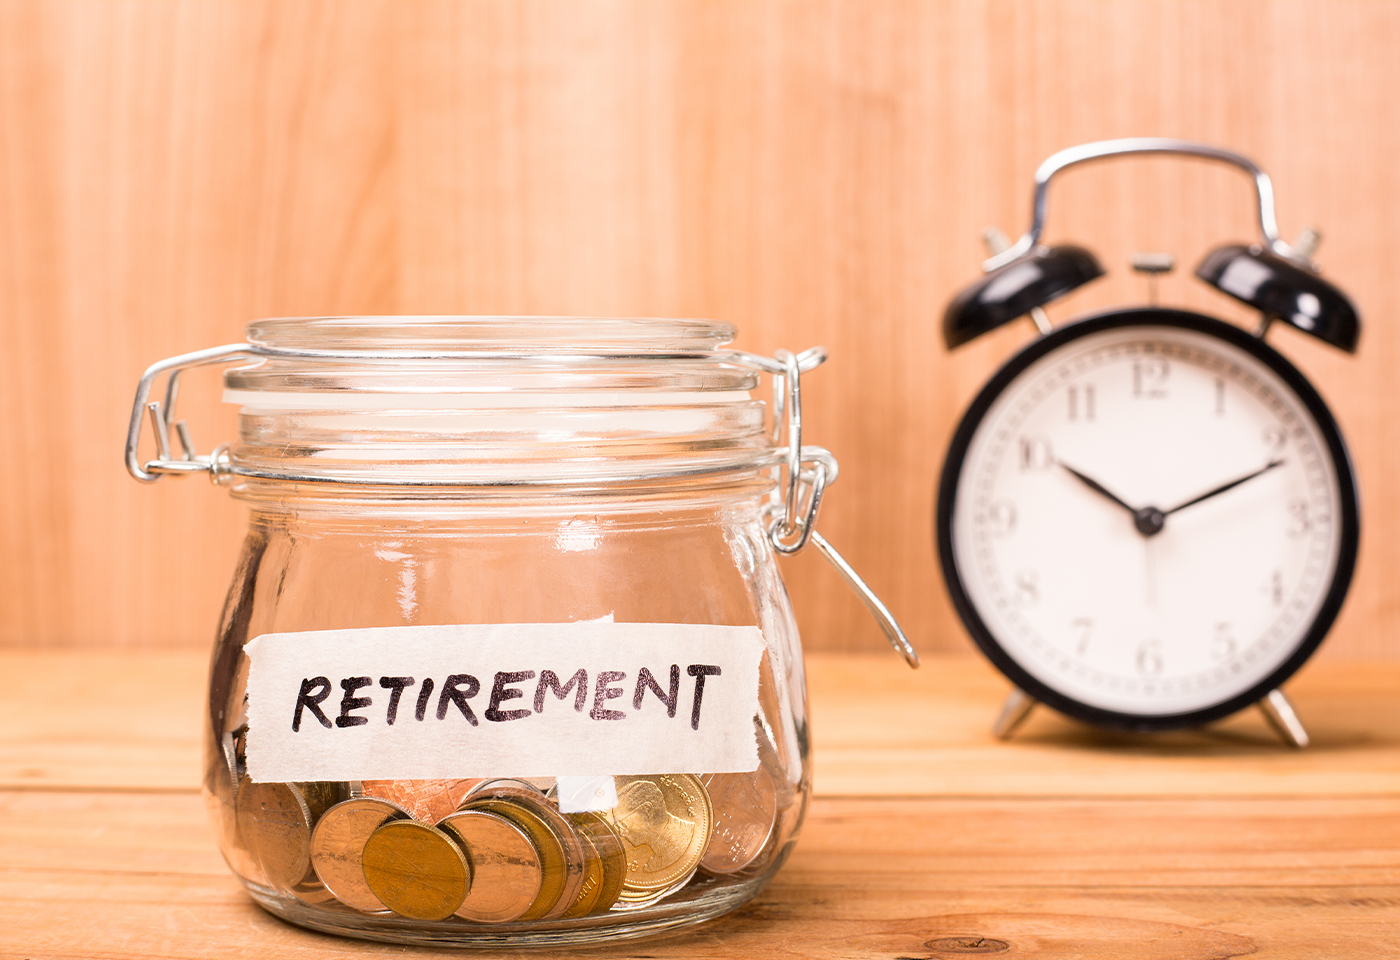 How to Get Prepared for Retirement